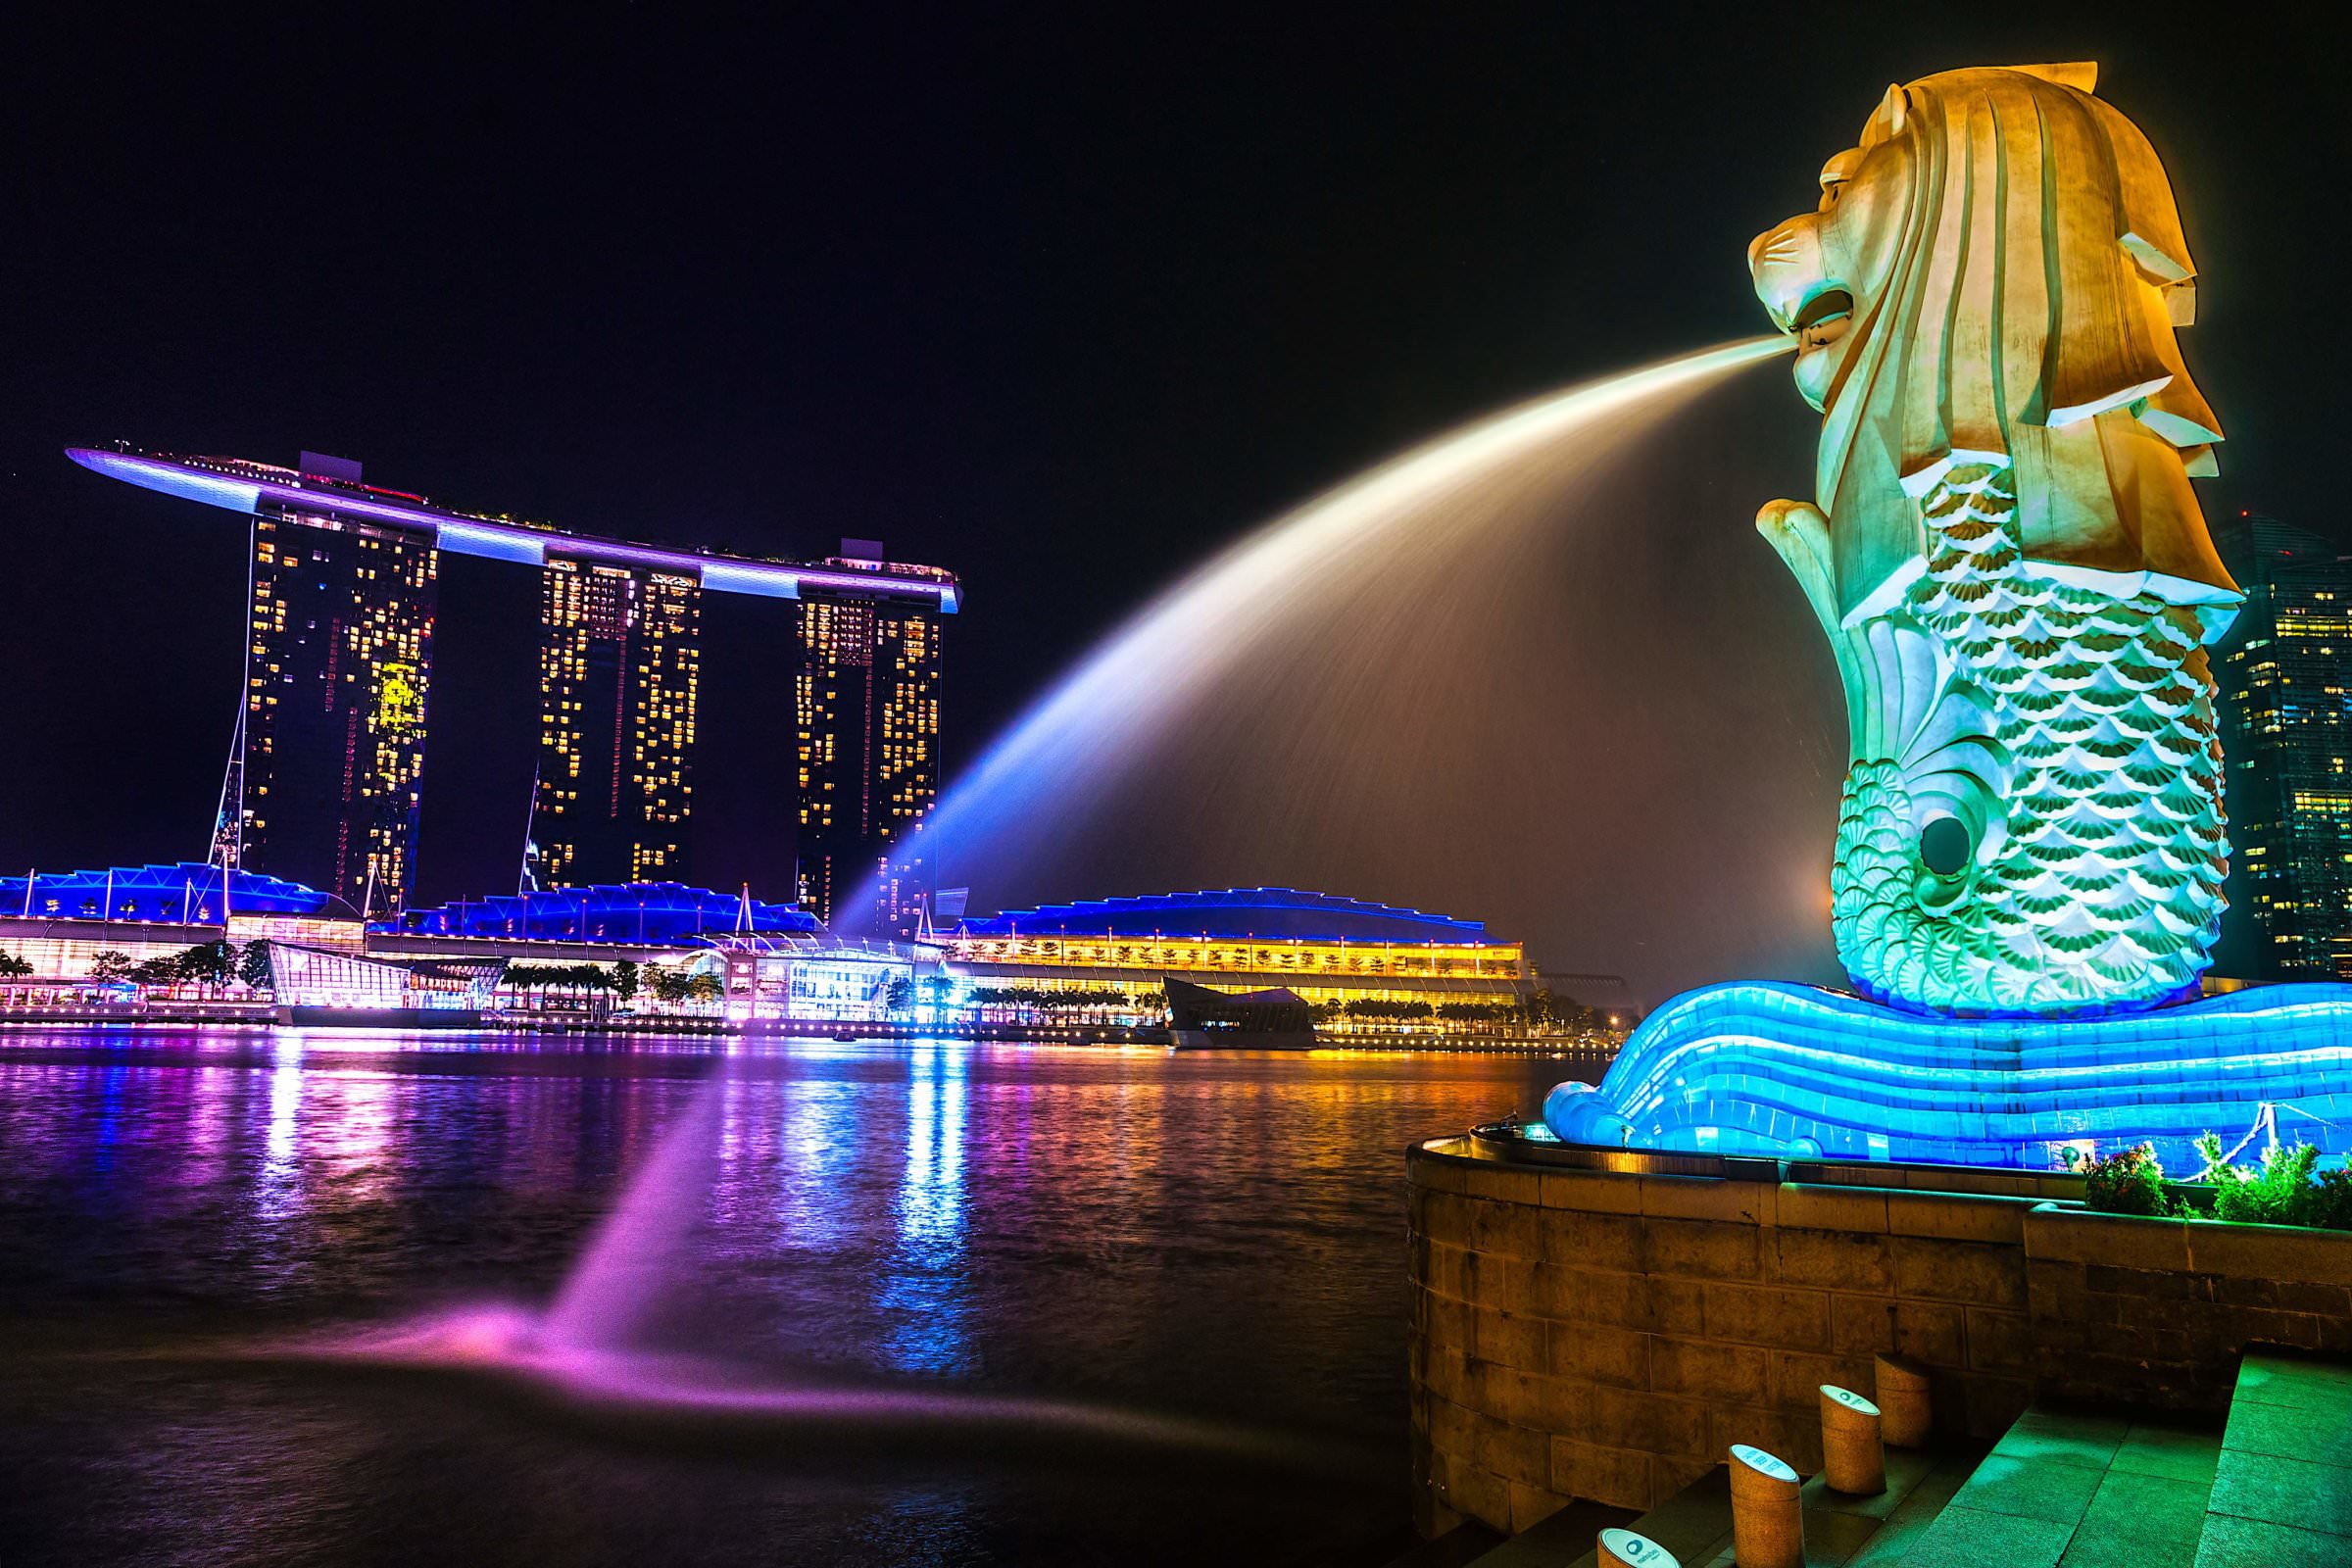 Vacation to a 7 day picturesque Singapore honeymoon